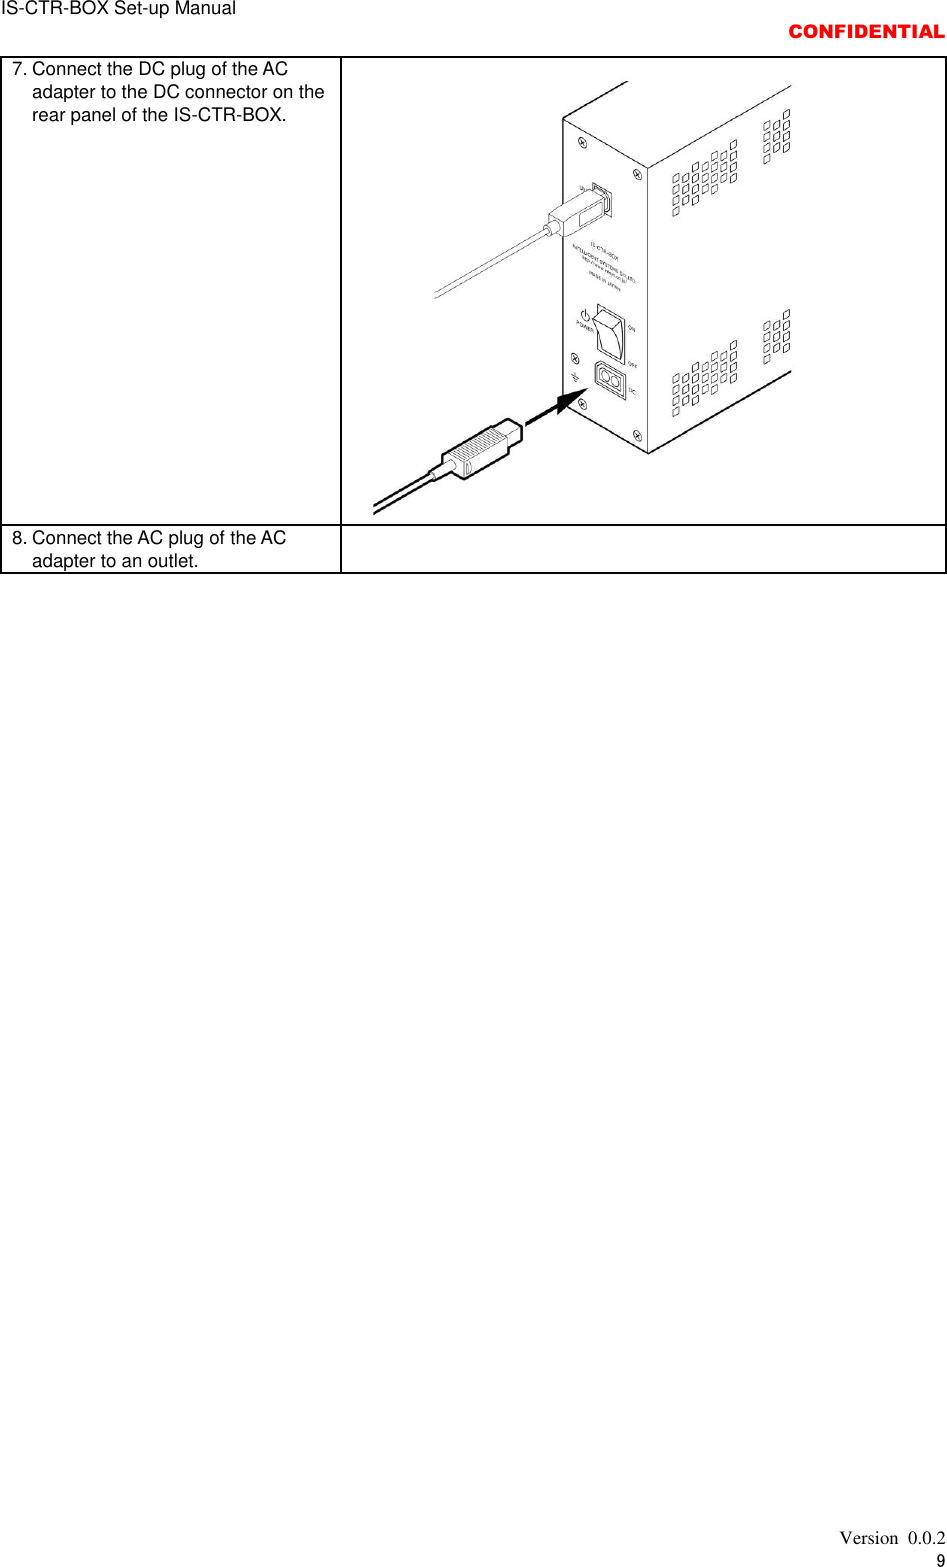 IS-CTR-BOX Set-up Manual  CONFIDENTIAL   Version  0.0.2 9 7. Connect the DC plug of the AC adapter to the DC connector on the rear panel of the IS-CTR-BOX.  8. Connect the AC plug of the AC adapter to an outlet.        